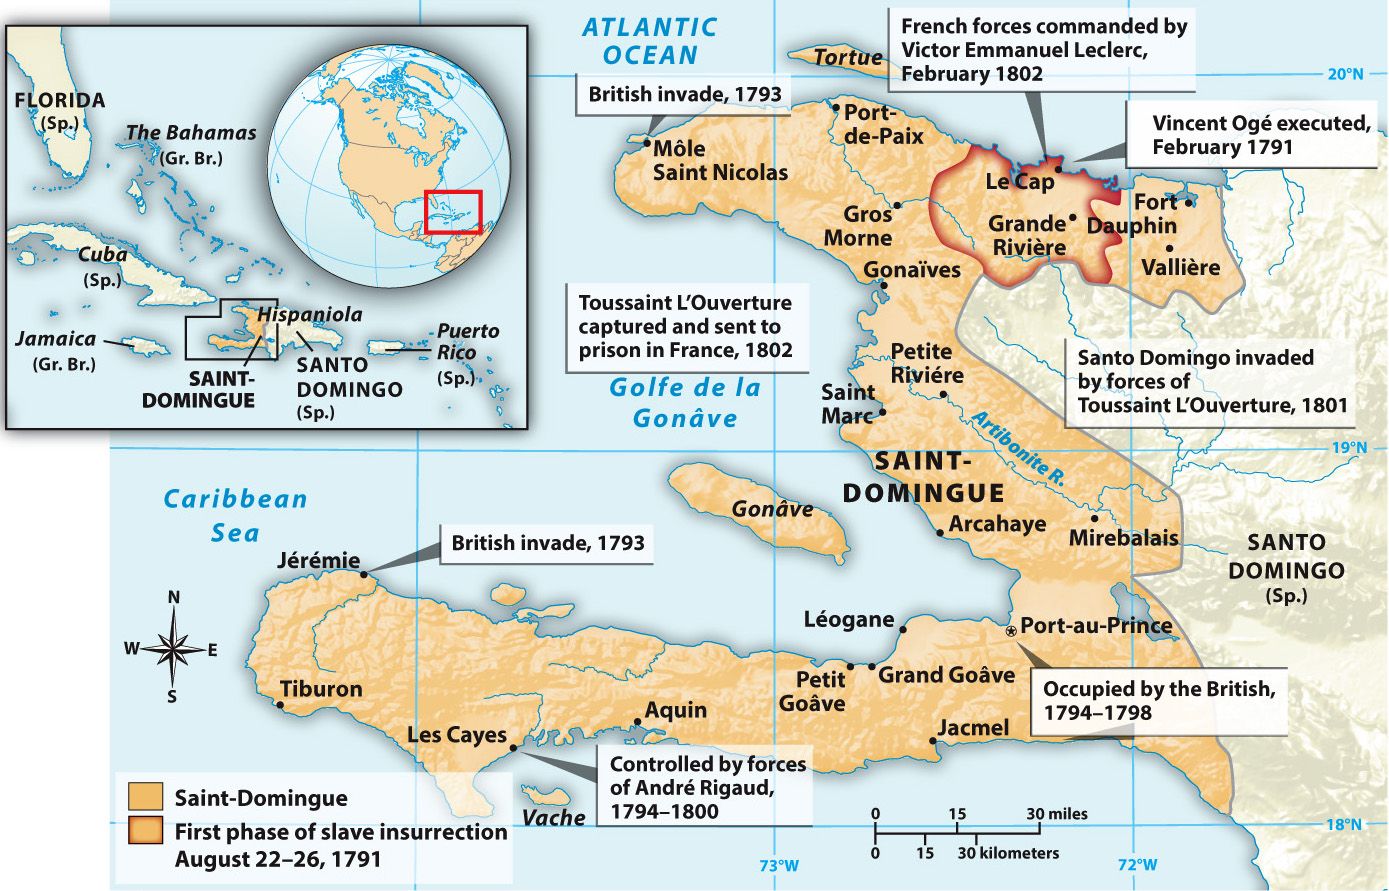 Important locations during the Haitian Revolution. Source: History of World Societies.